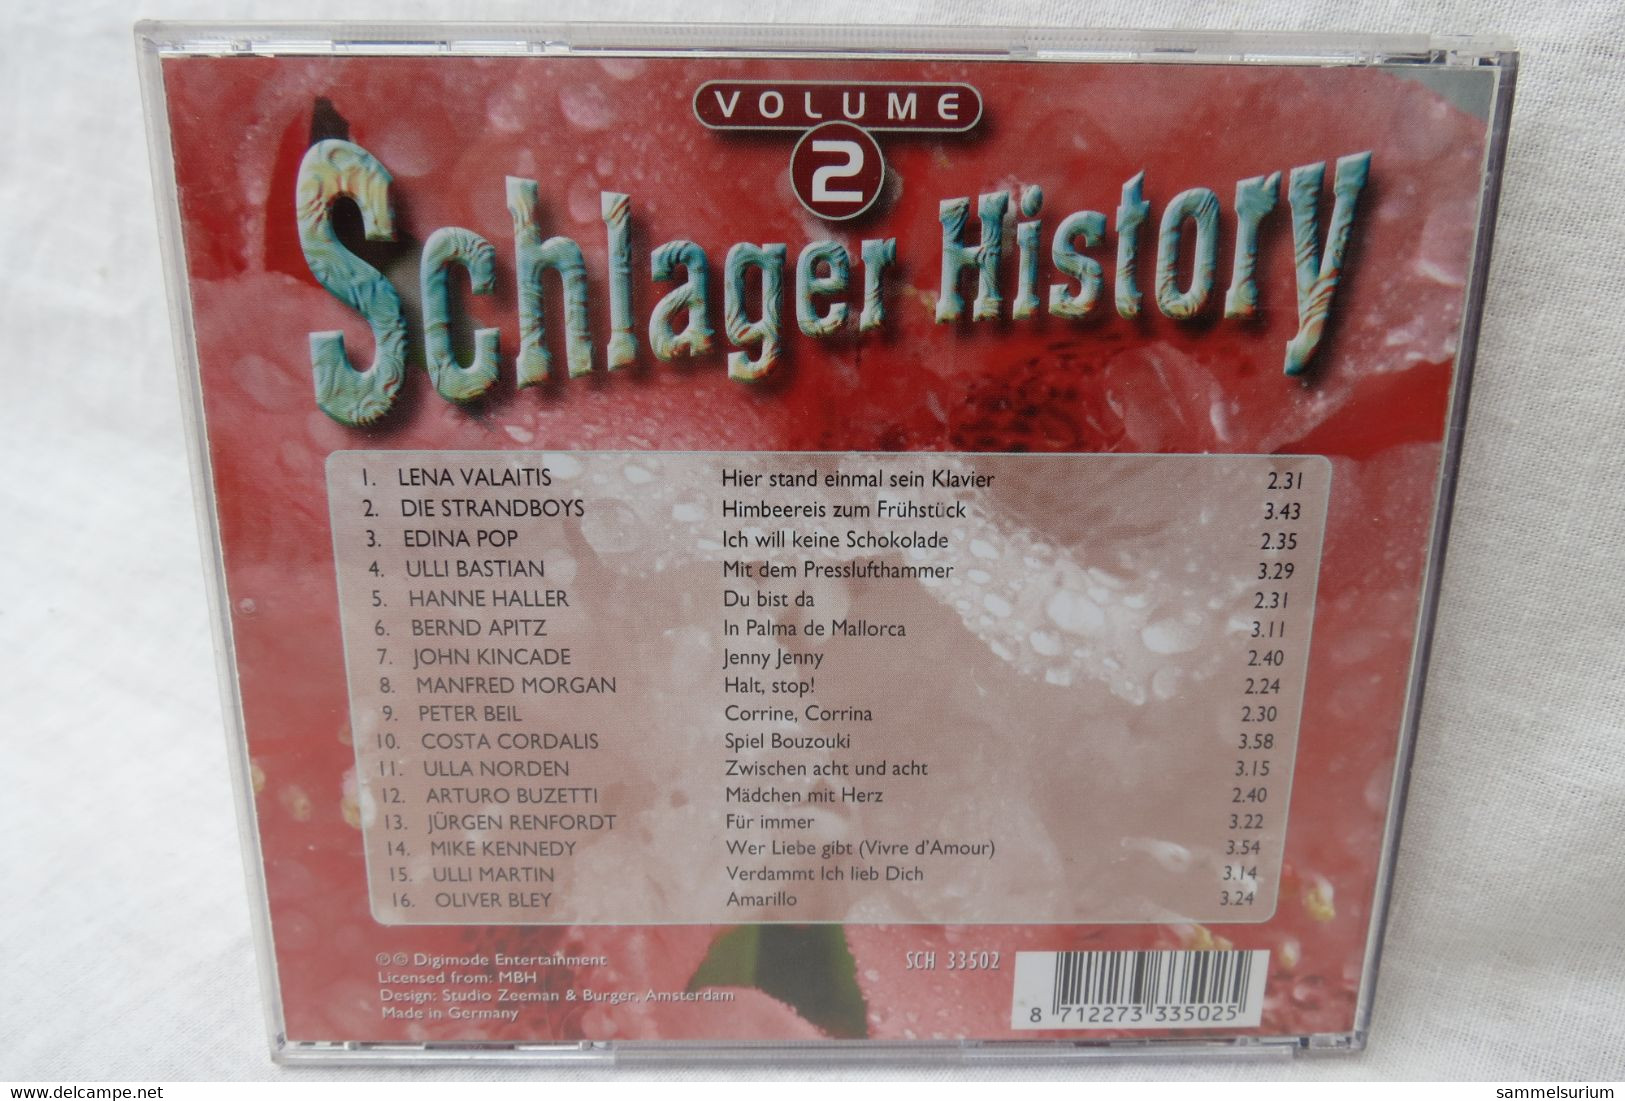 CD "Schlager History" Volume 2 - Compilations